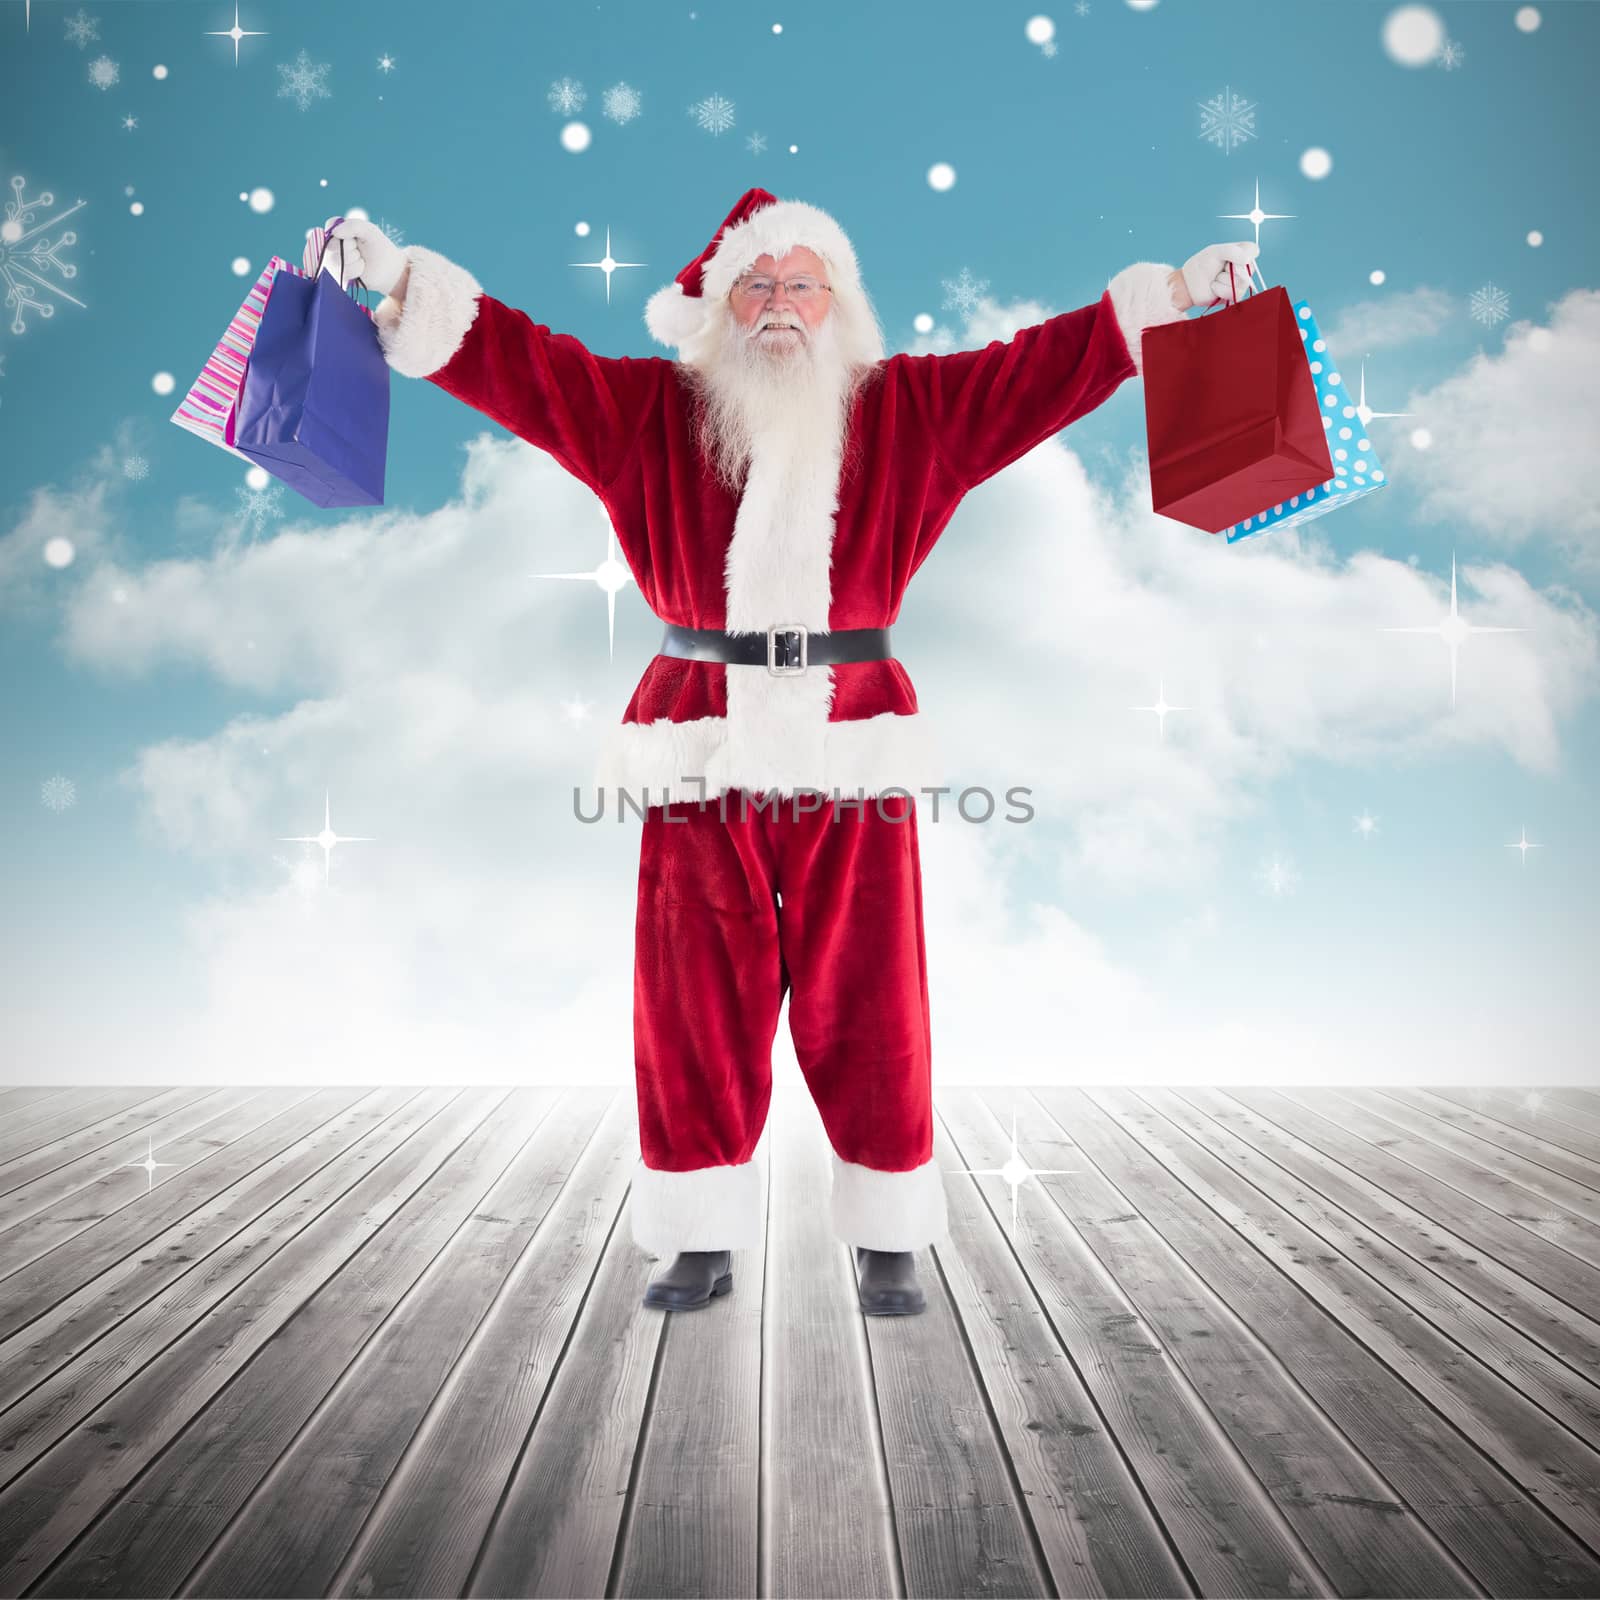 Santa carrying gifts against cloudy sky background